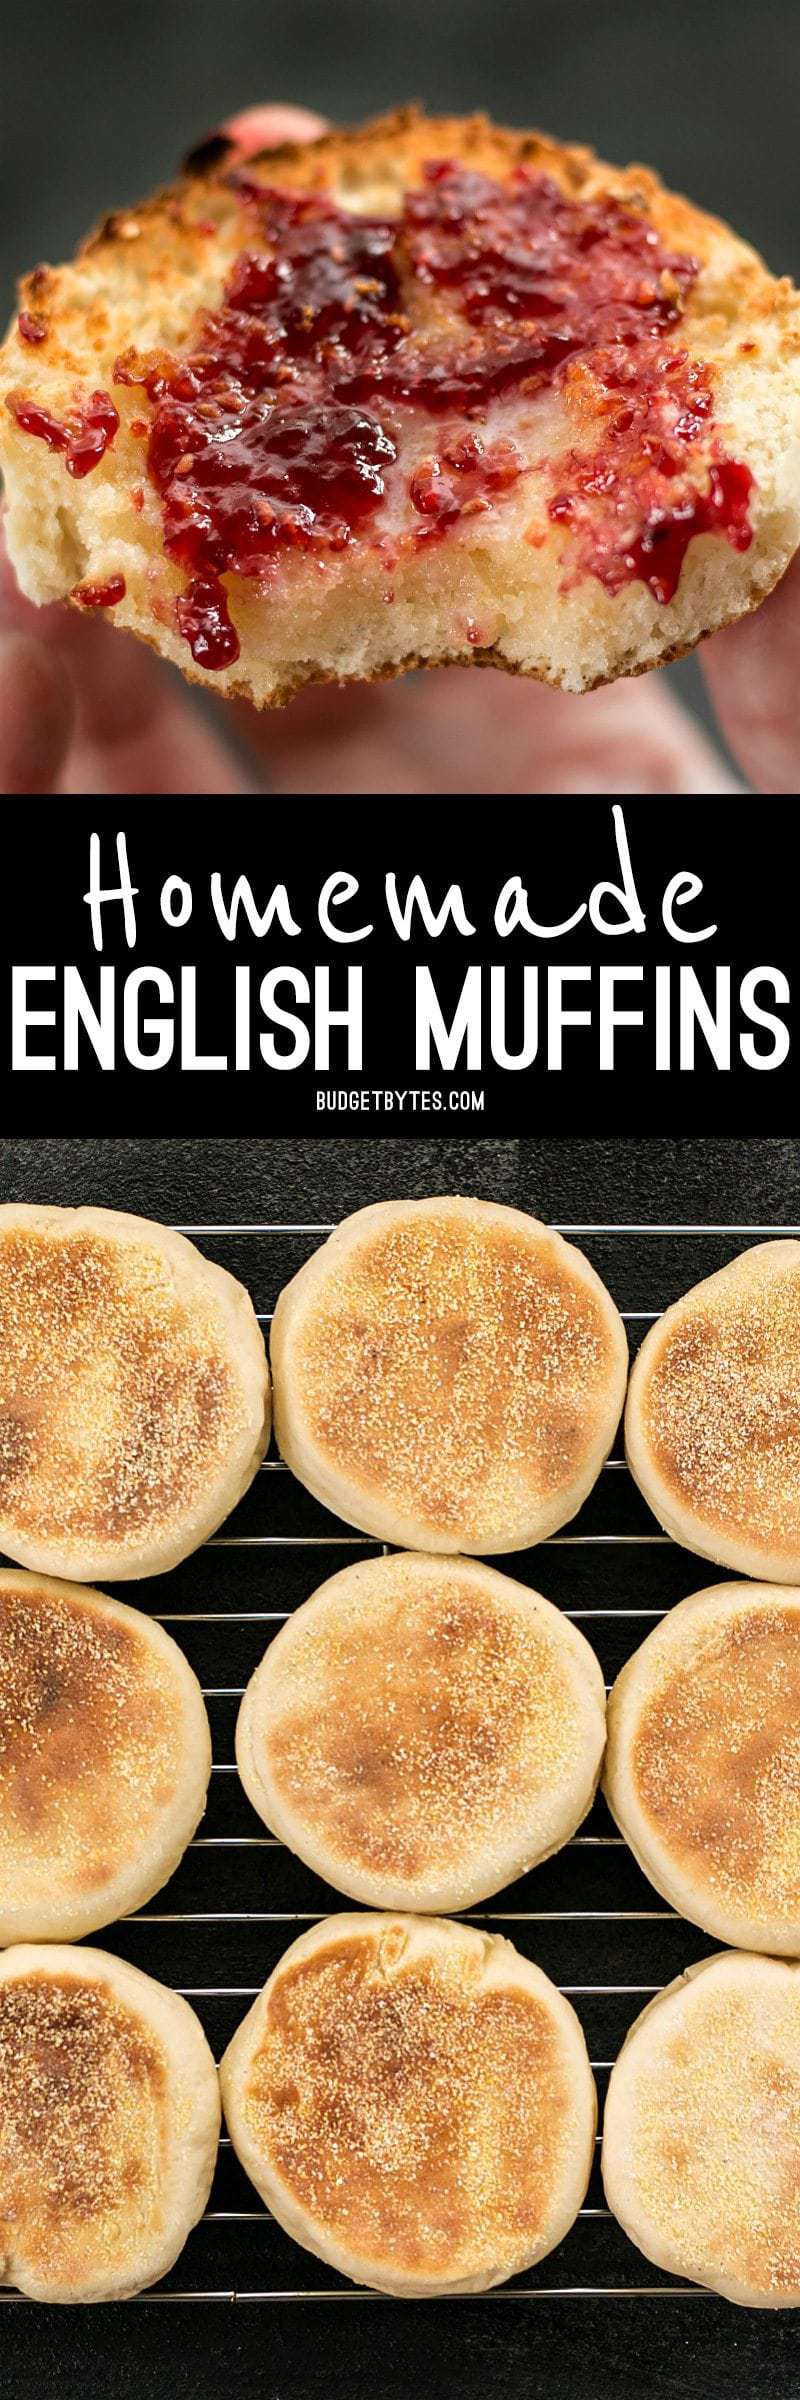 Homemade English muffins are fun to make, delicious, and cost just pennies each. Make this your next weekend project! BudgetBytes.com